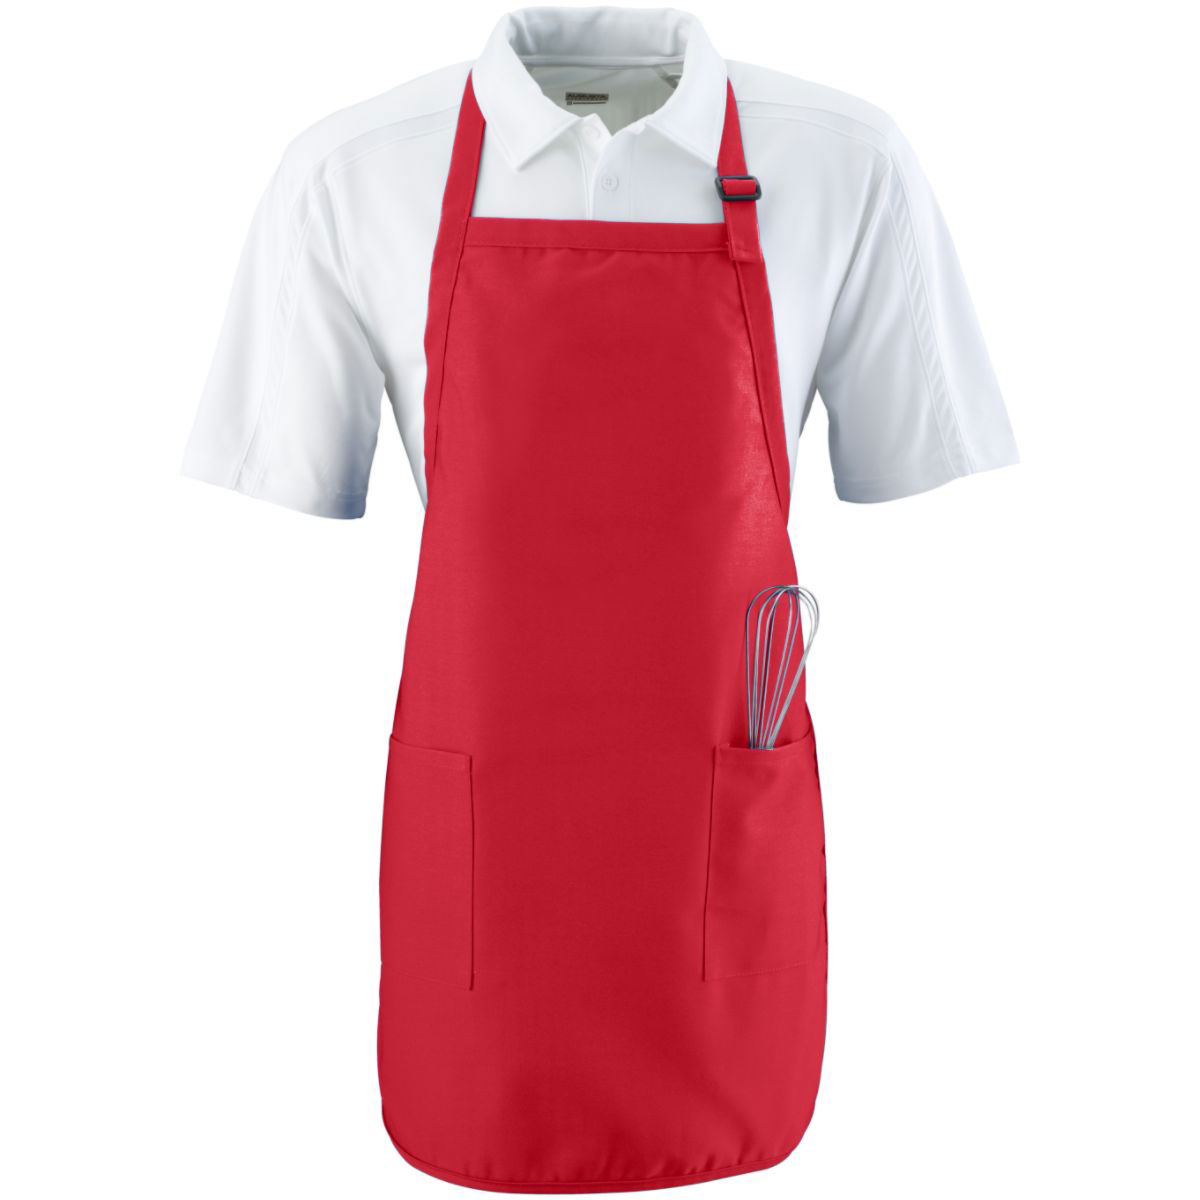 Augusta Sportswear® 4350 Full Length Apron with Pockets